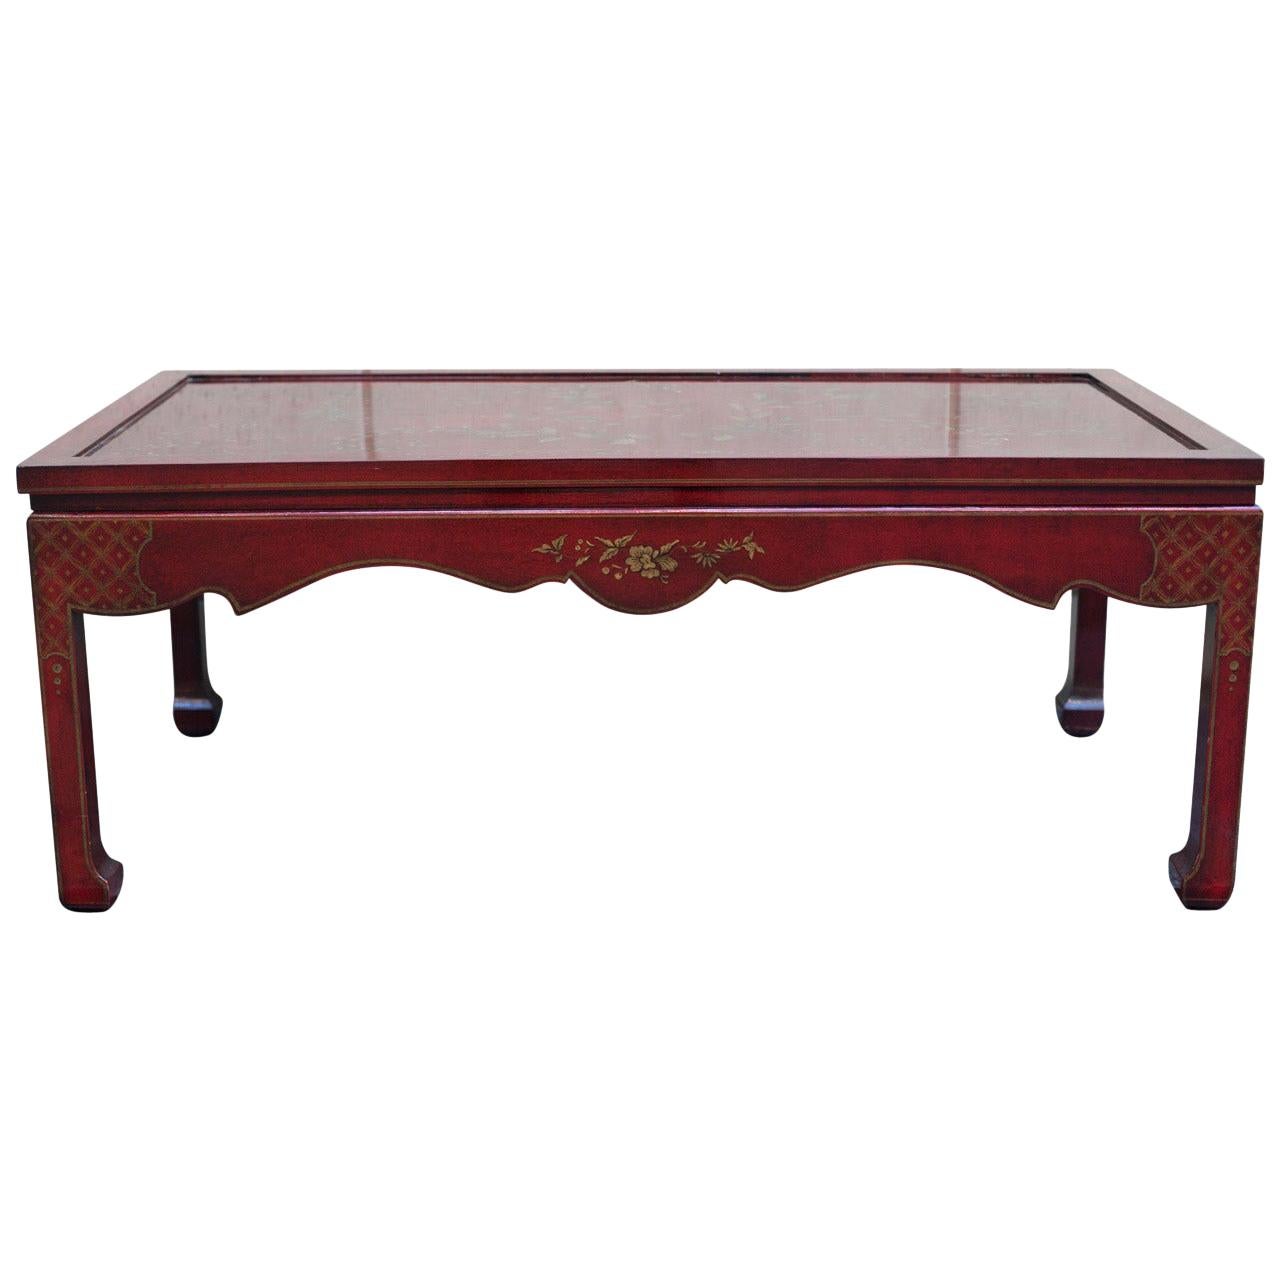 Hand Decorated Coffee Table in Dark Red with a Gilt Floral Chinoiserie Design